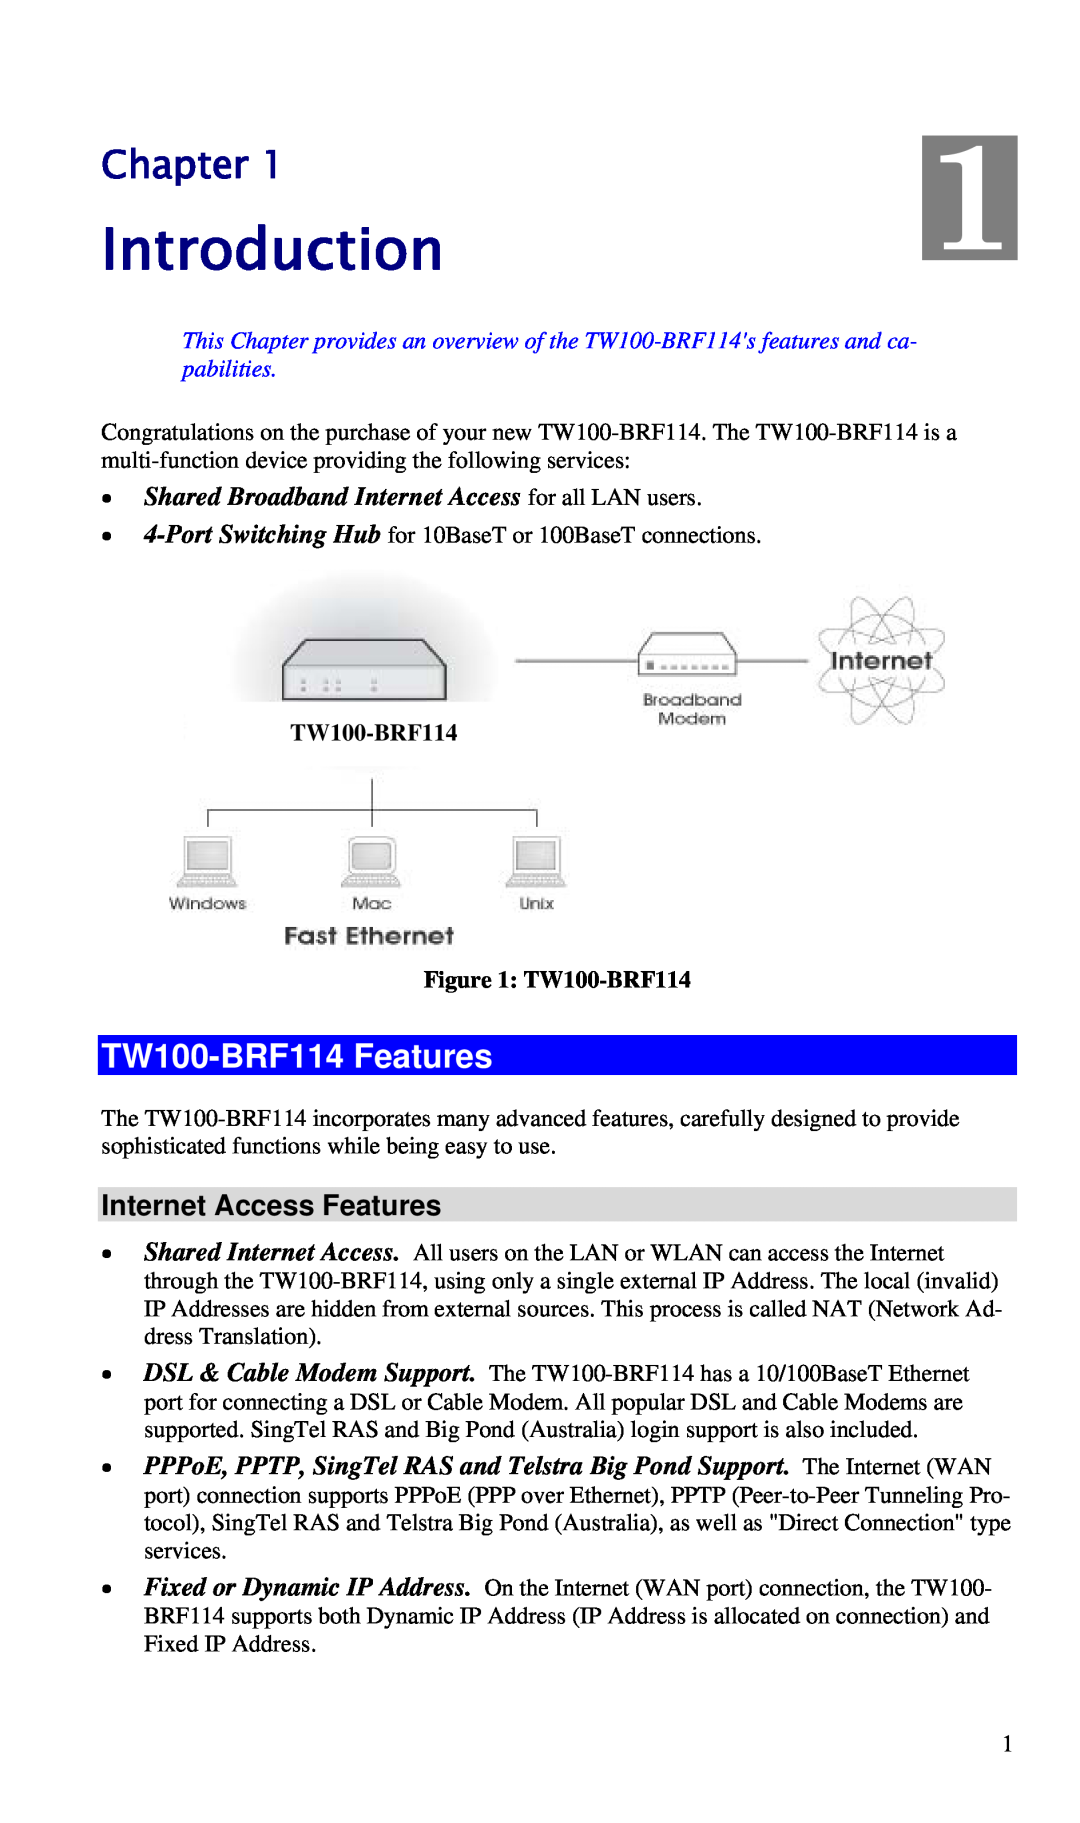 TRENDnet manual Introduction, Chapter, TW100-BRF114 Features, Internet Access Features, TW100-BRF114 TW100-BRF114 